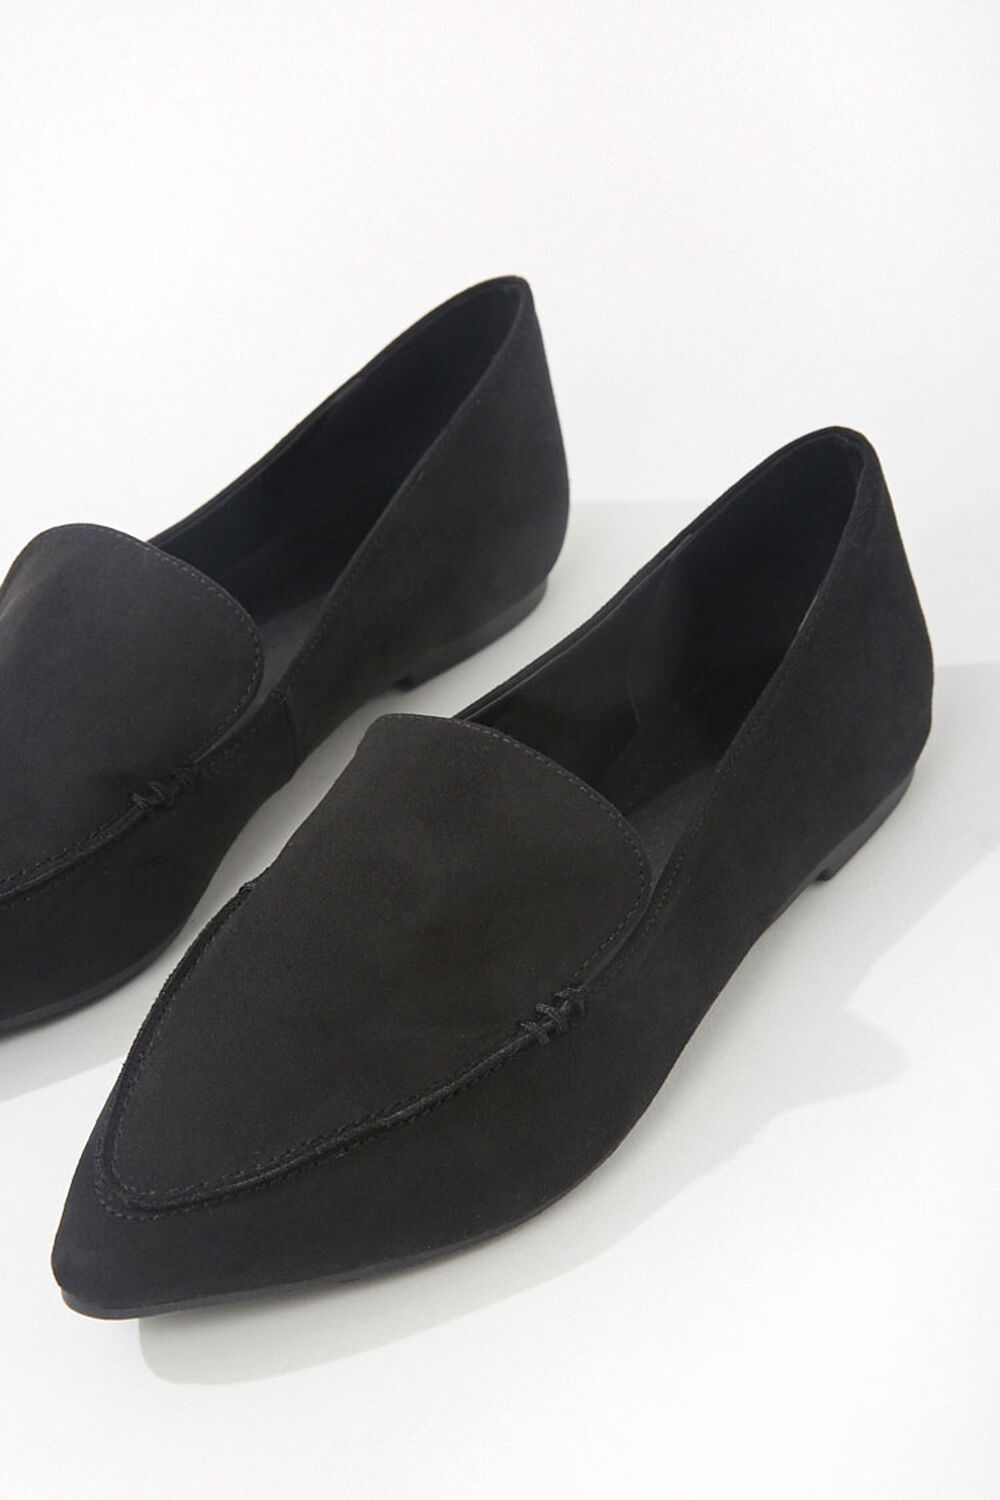 BLACK Faux Suede Pointed-Toe Loafers, image 3